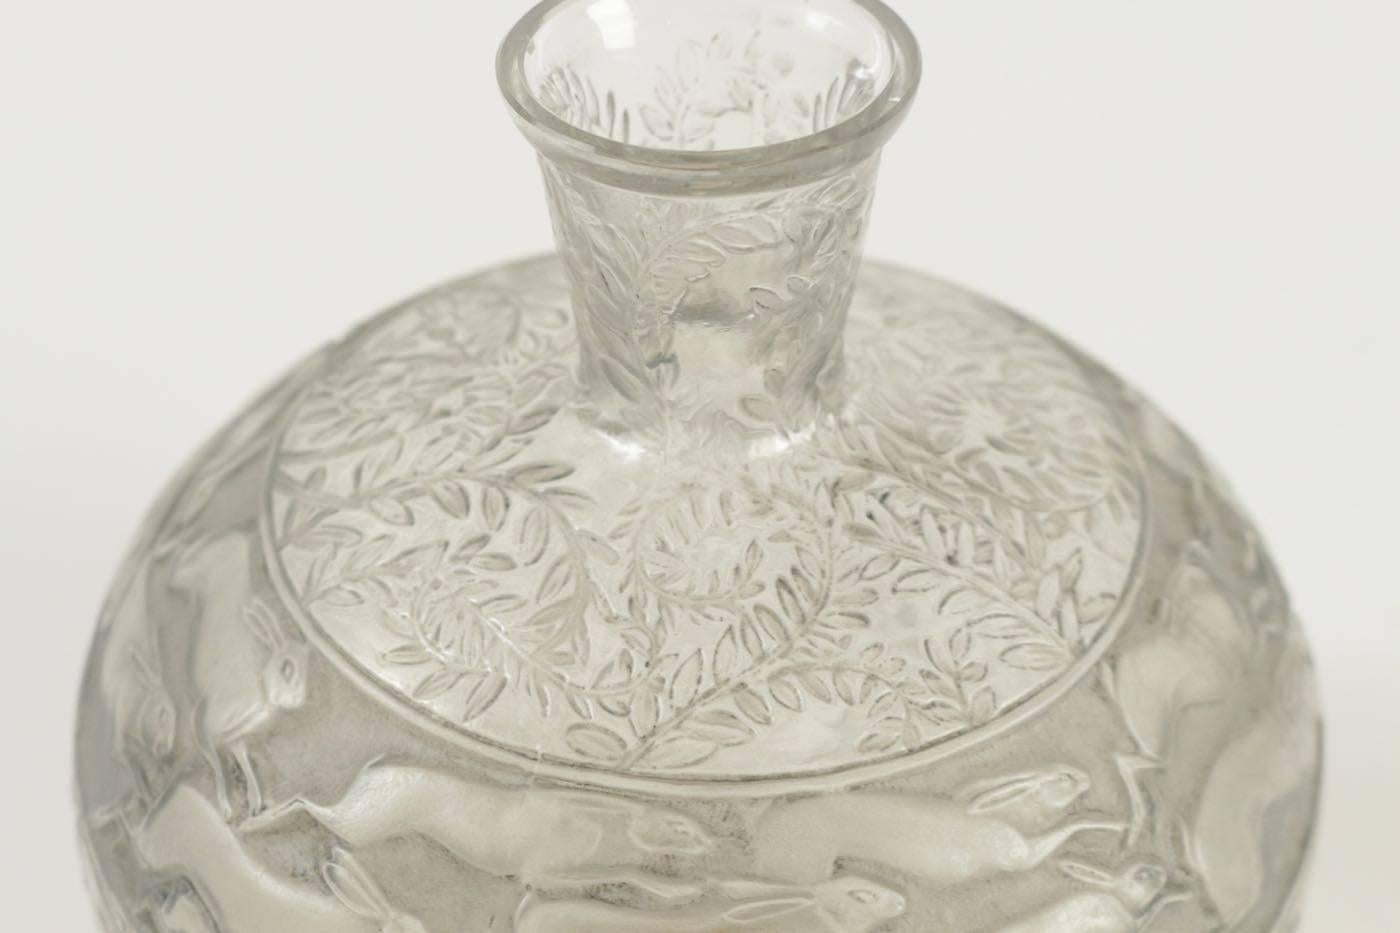 Tall bulbous grey patinated, clear and frosted glass container with a conical somewhat long neck and decorated with a band of running hares in between foliageBibliographie: Félix Marcilhac, “René Lalique, catalogue raisonné de l'oeuvre de verre,”